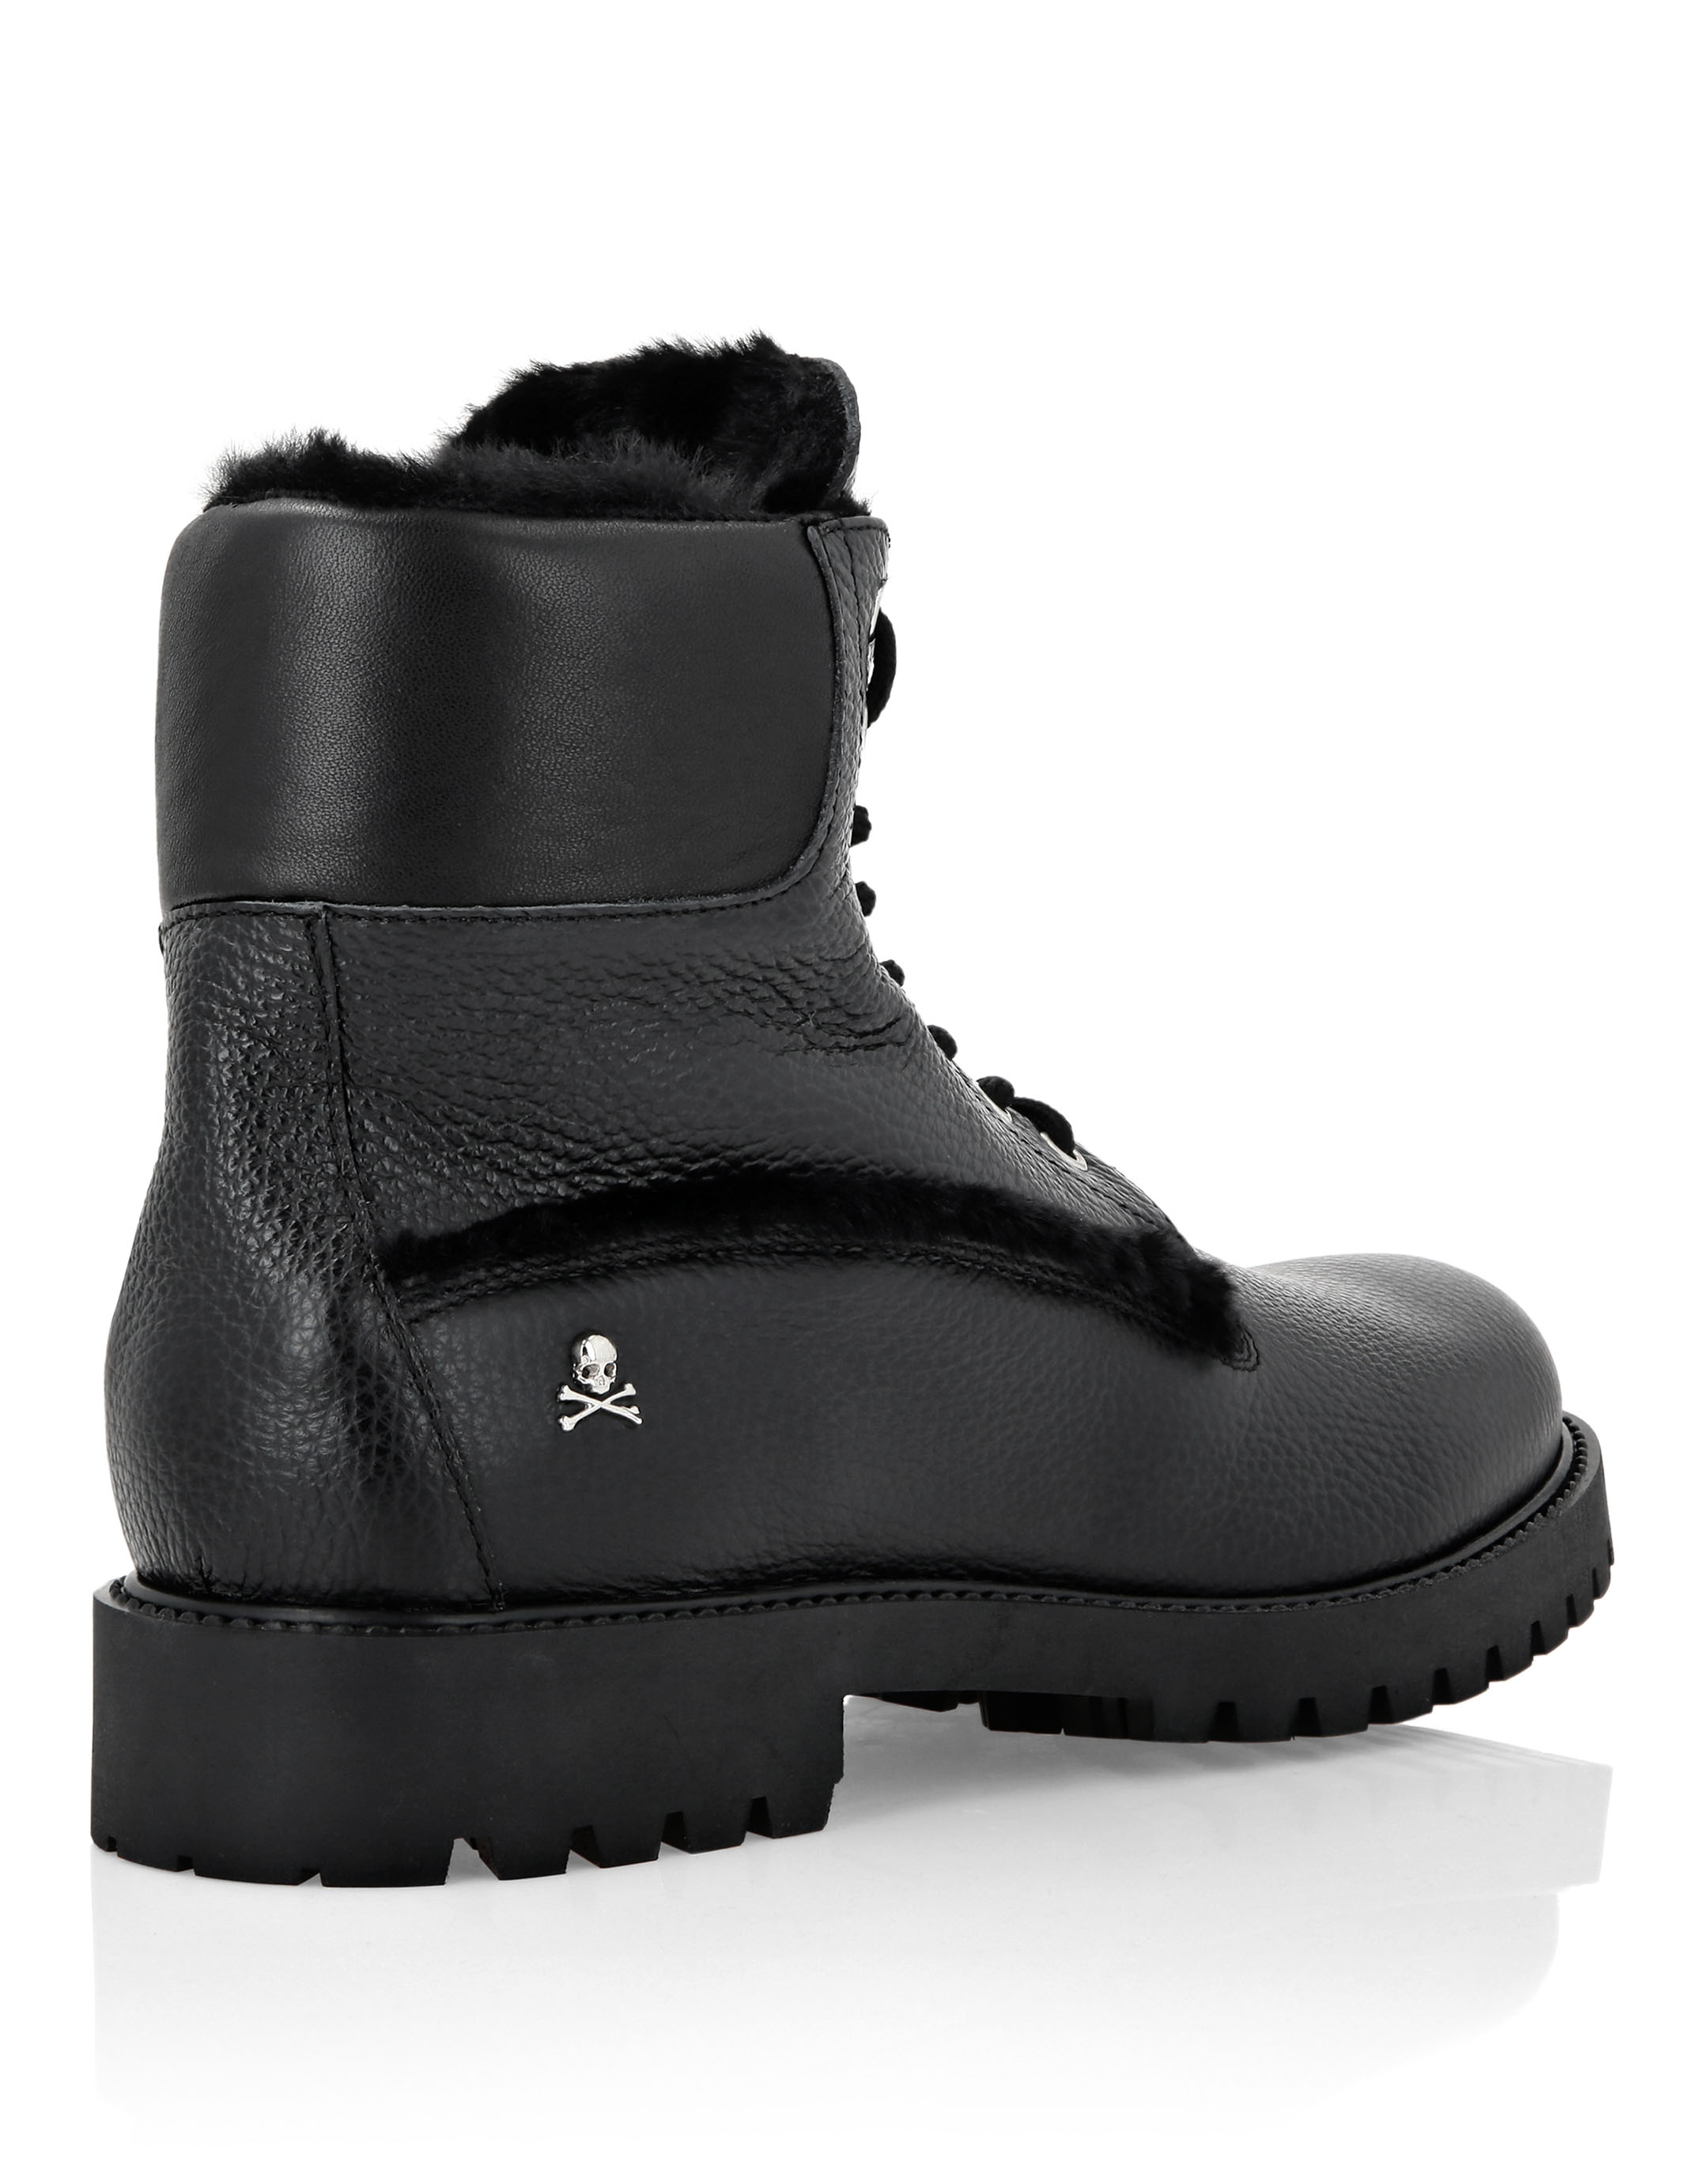 Leather Boots with shearling inside The Hunter | Philipp Plein Outlet